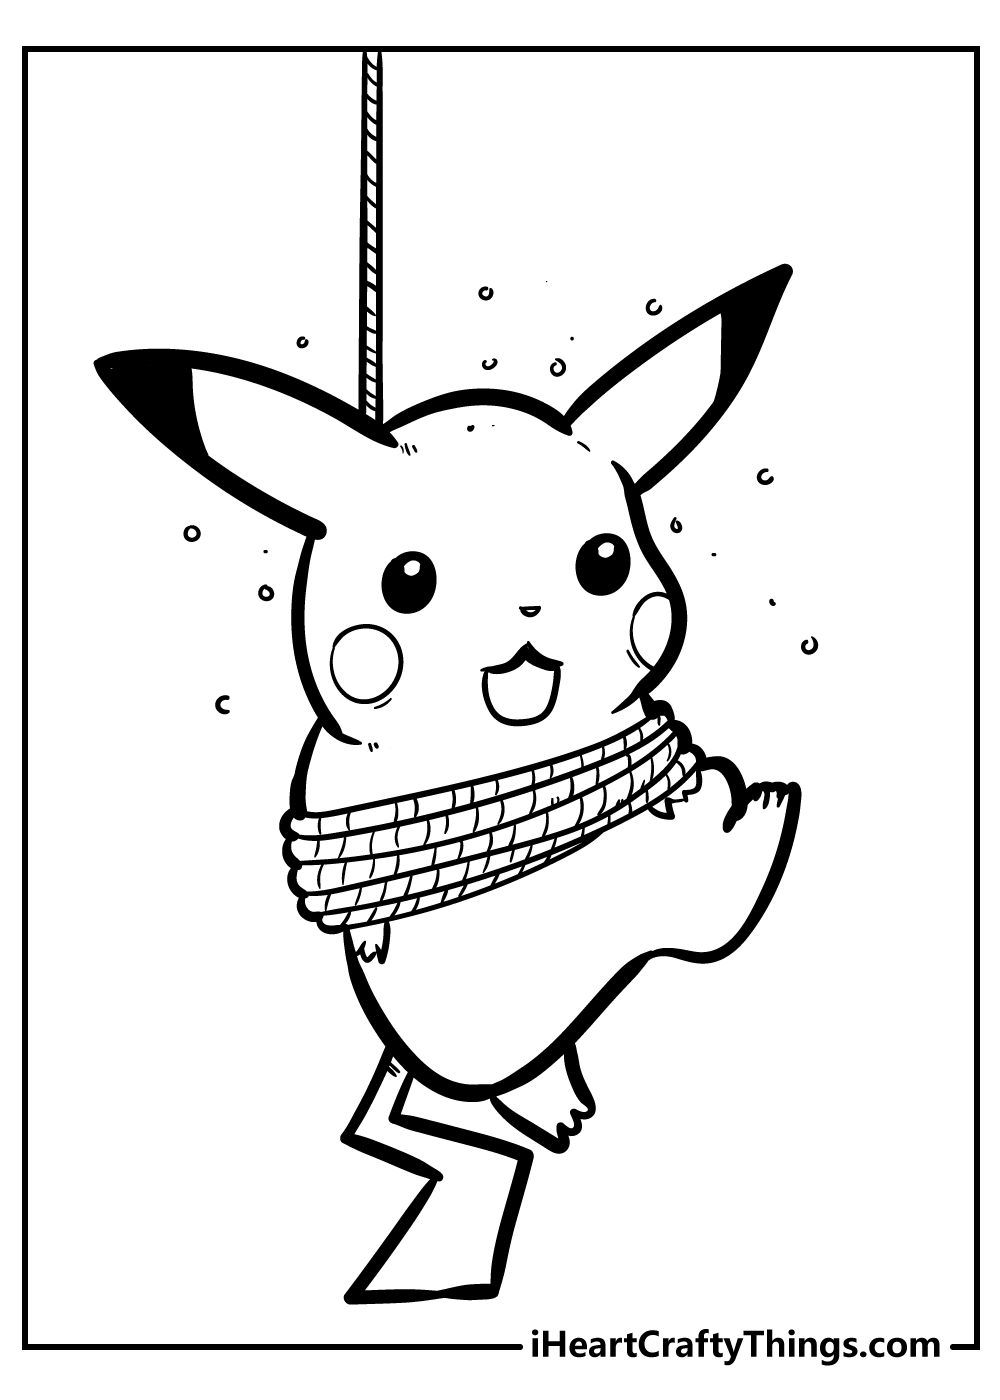 Pikachu coloring pages free printables